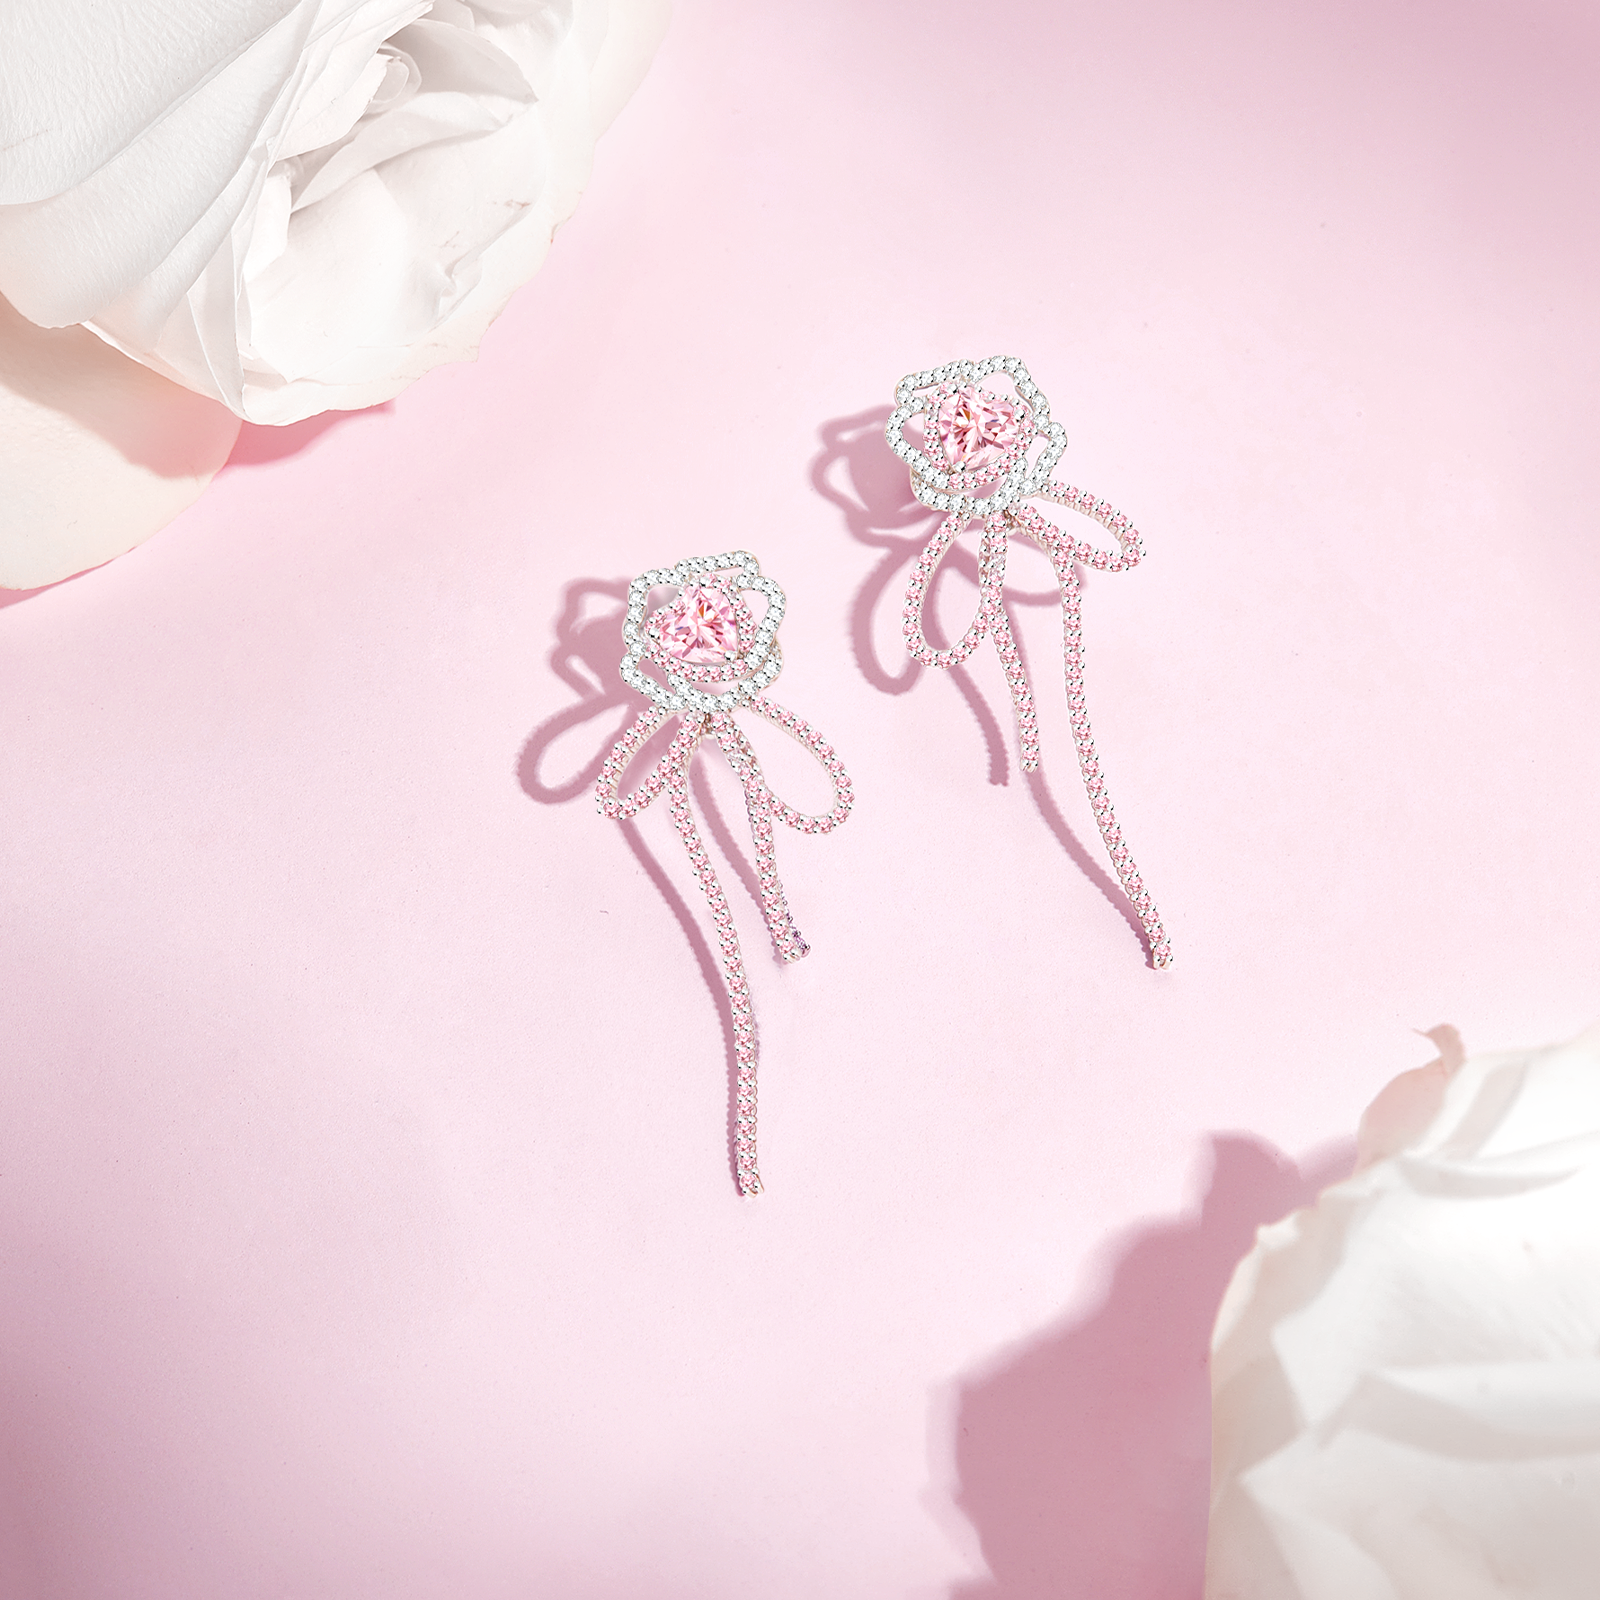 FANCI ME "Rose Amour" Sterling Silver Satin Bow Earrings Show